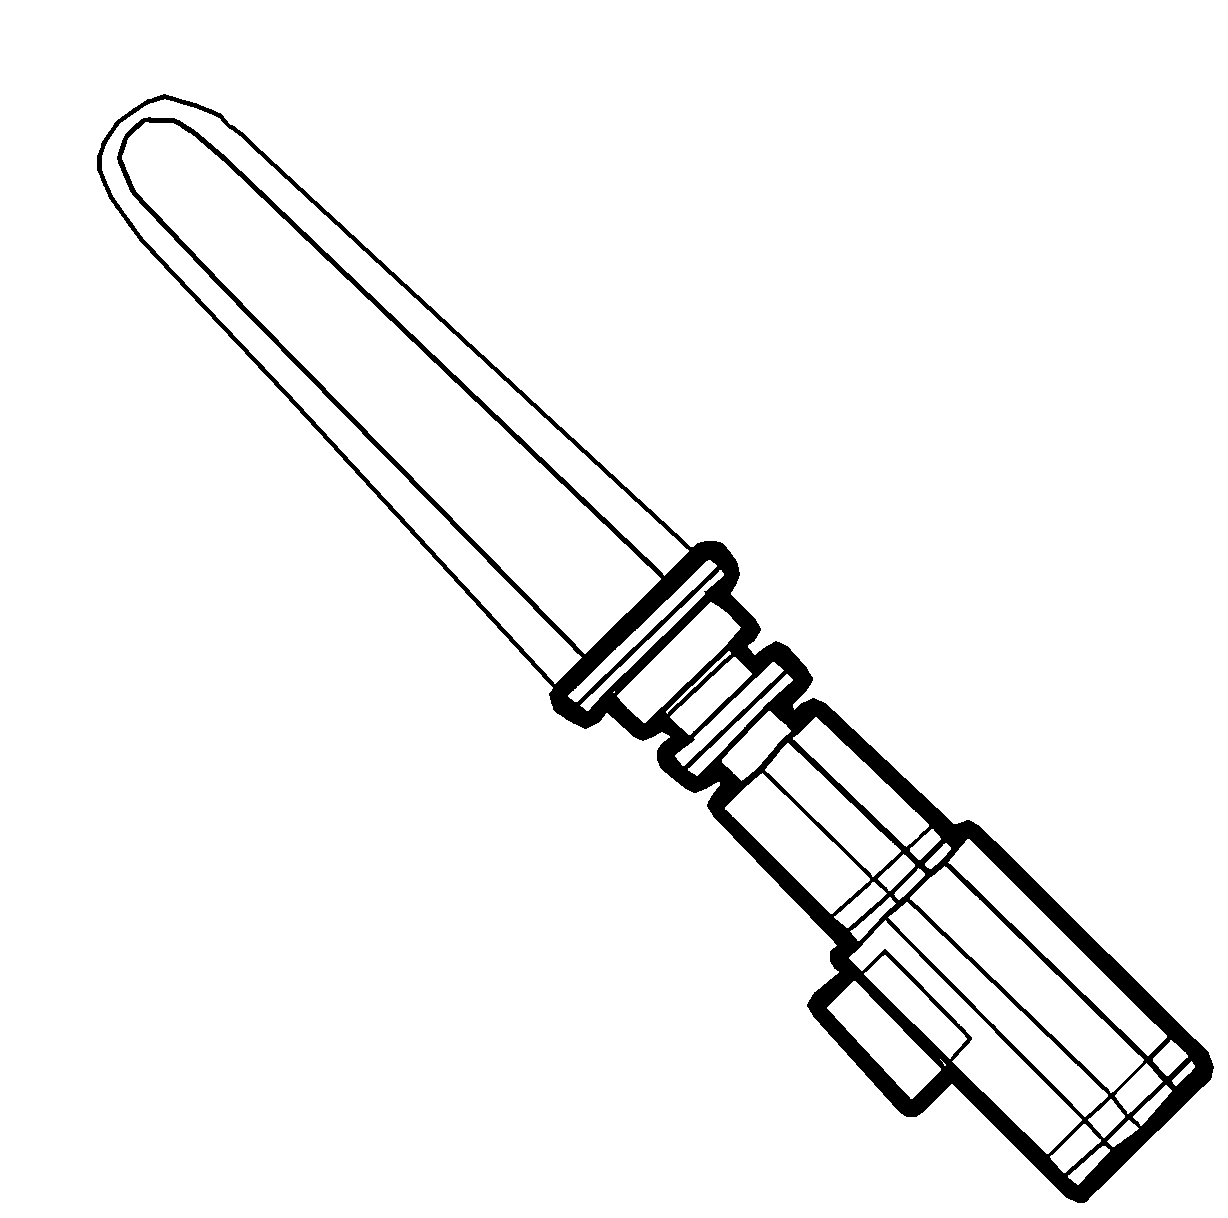 Starwars_2013_Emote_Lightsaber_Coloring_Page | Wecoloringpage